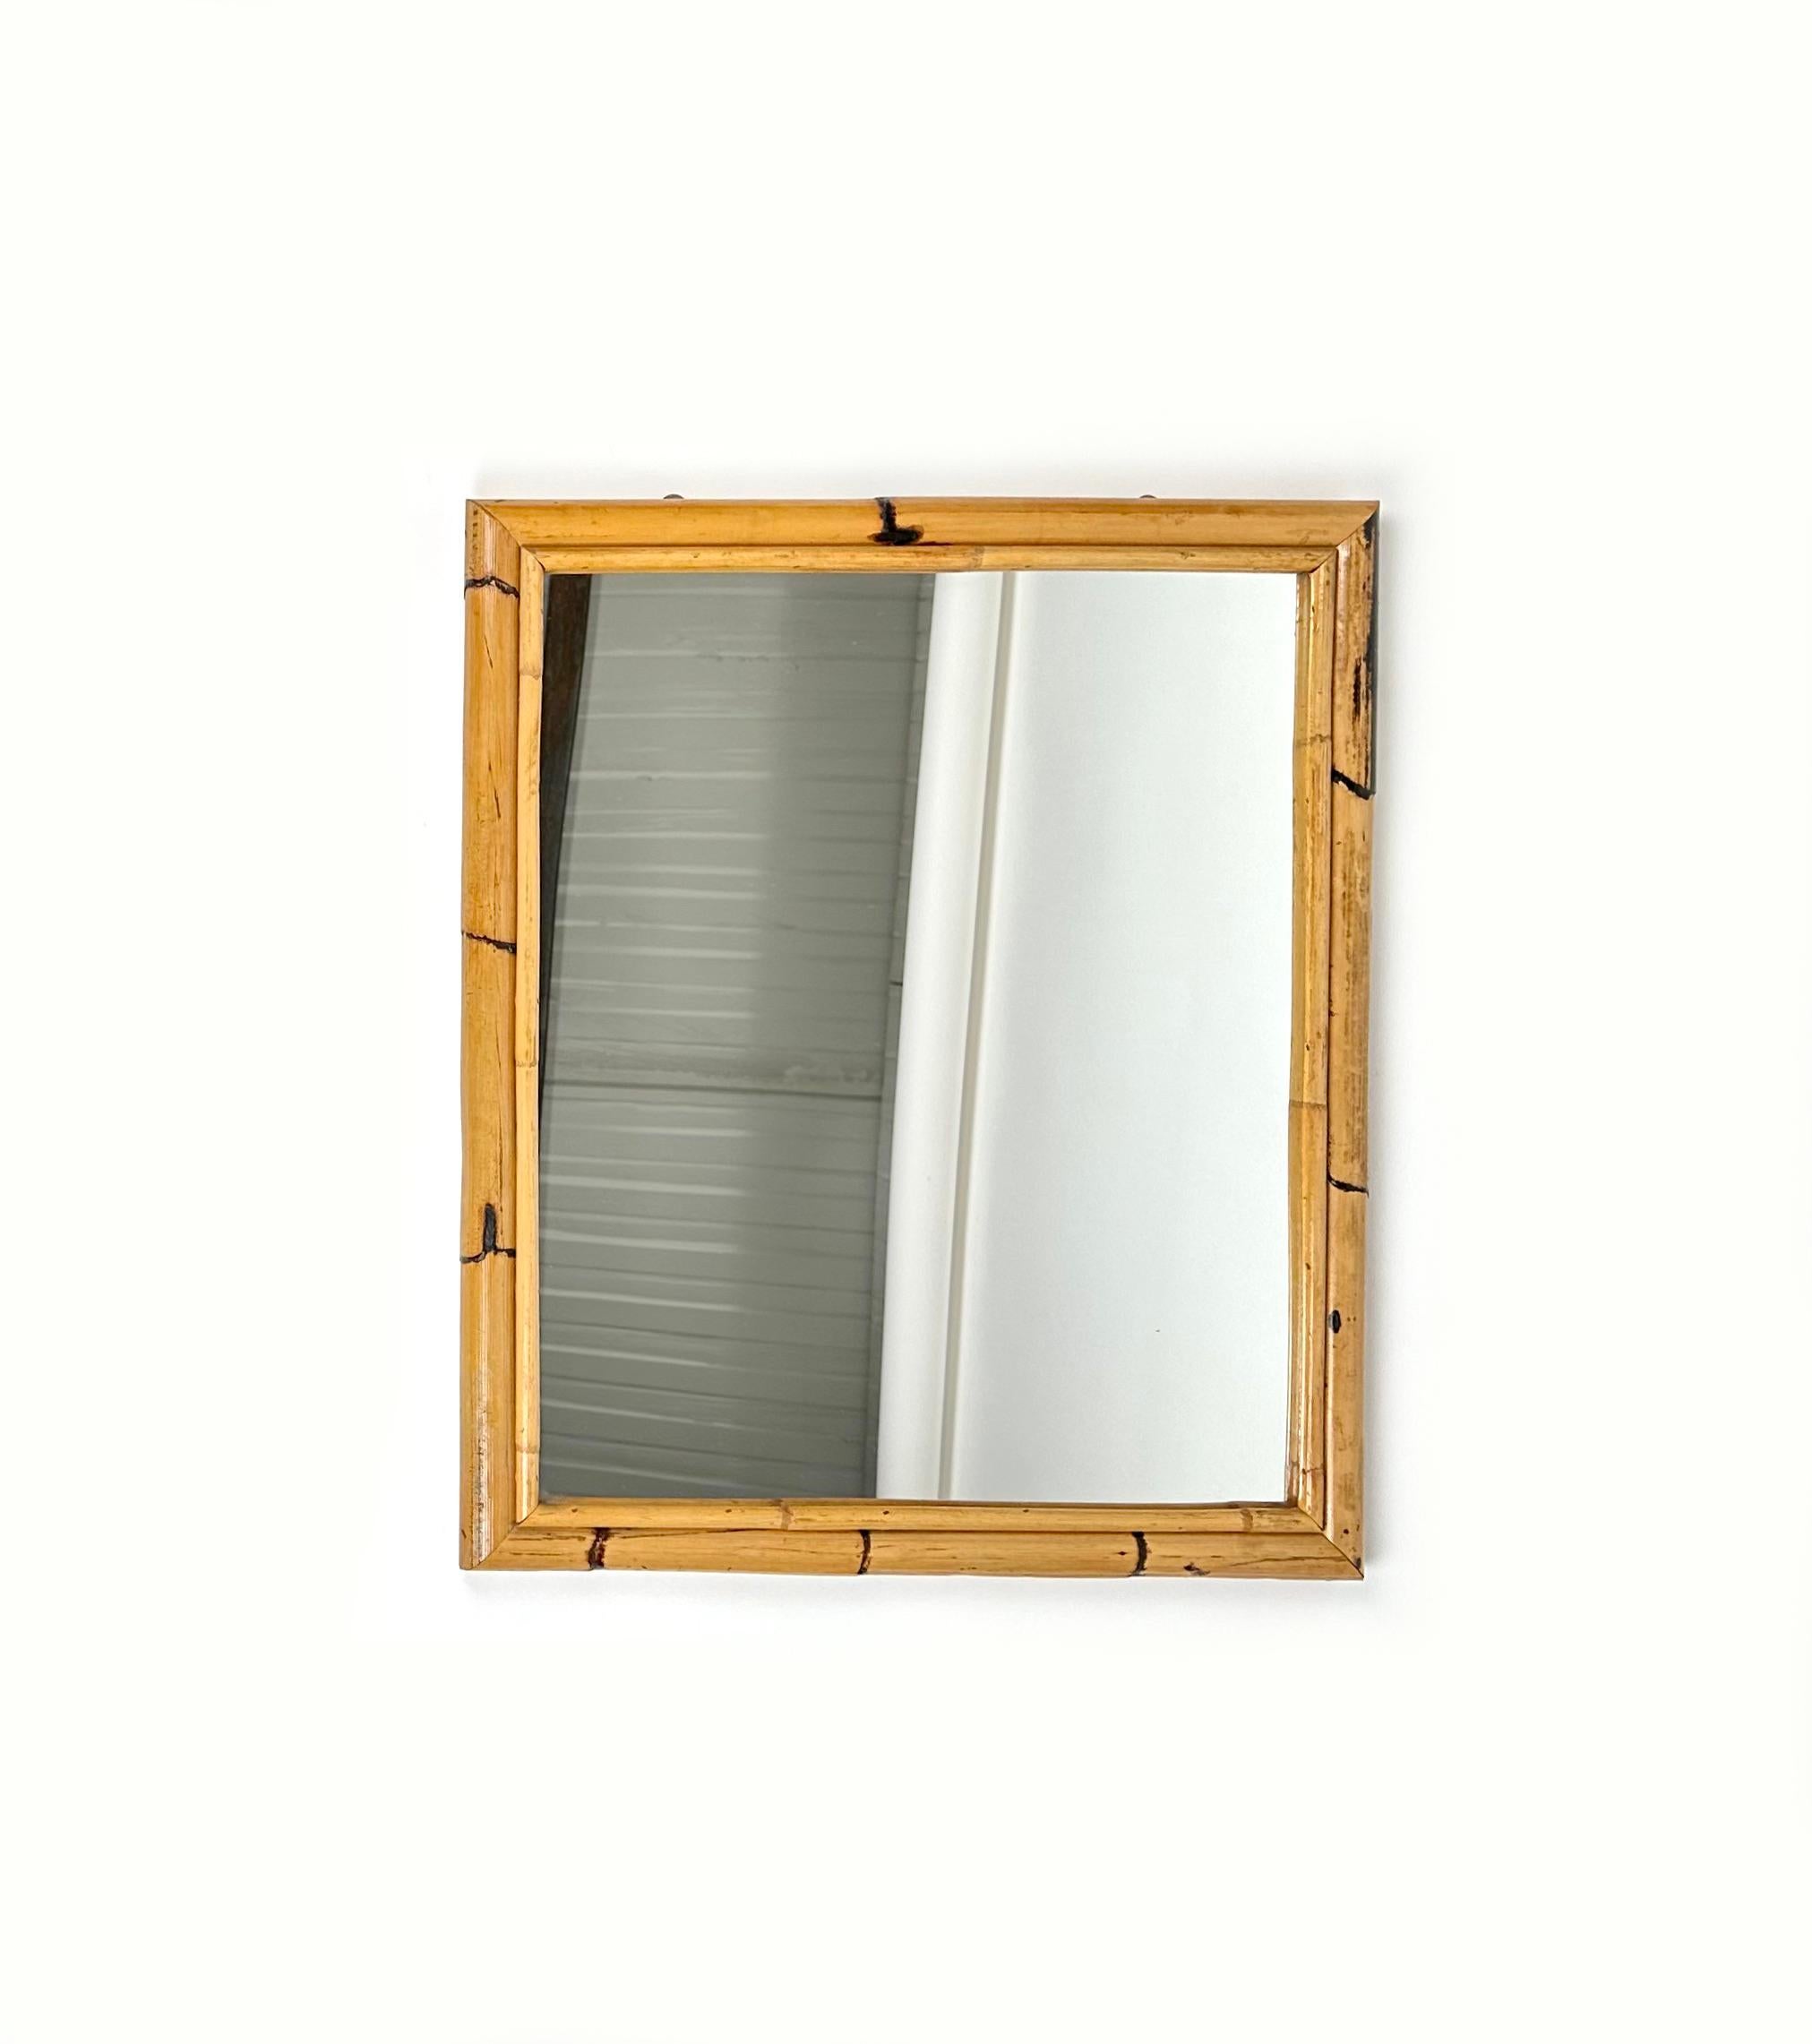 Beautiful rectangular wall mirror double Bamboo frame.

Made in Italy in the 1970s.